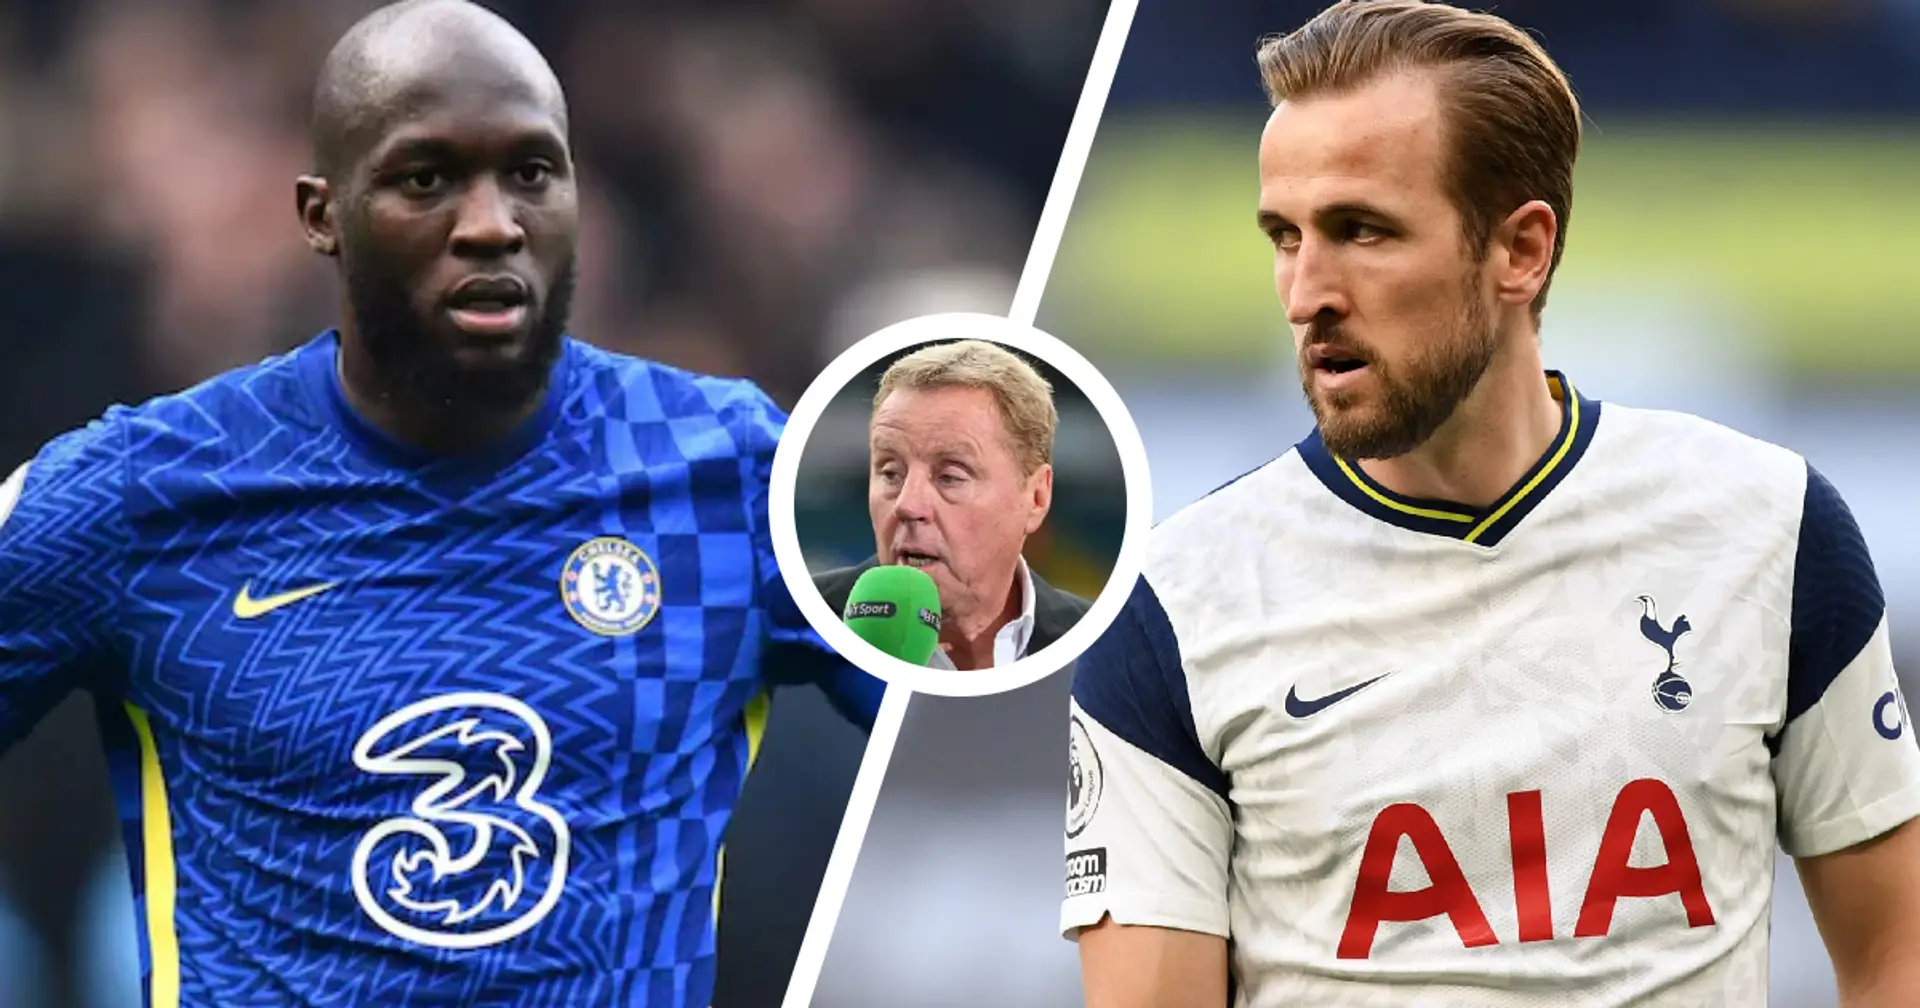 Former Spurs manager Harry Redknapp claims Kane is 'on a different level' to Lukaku